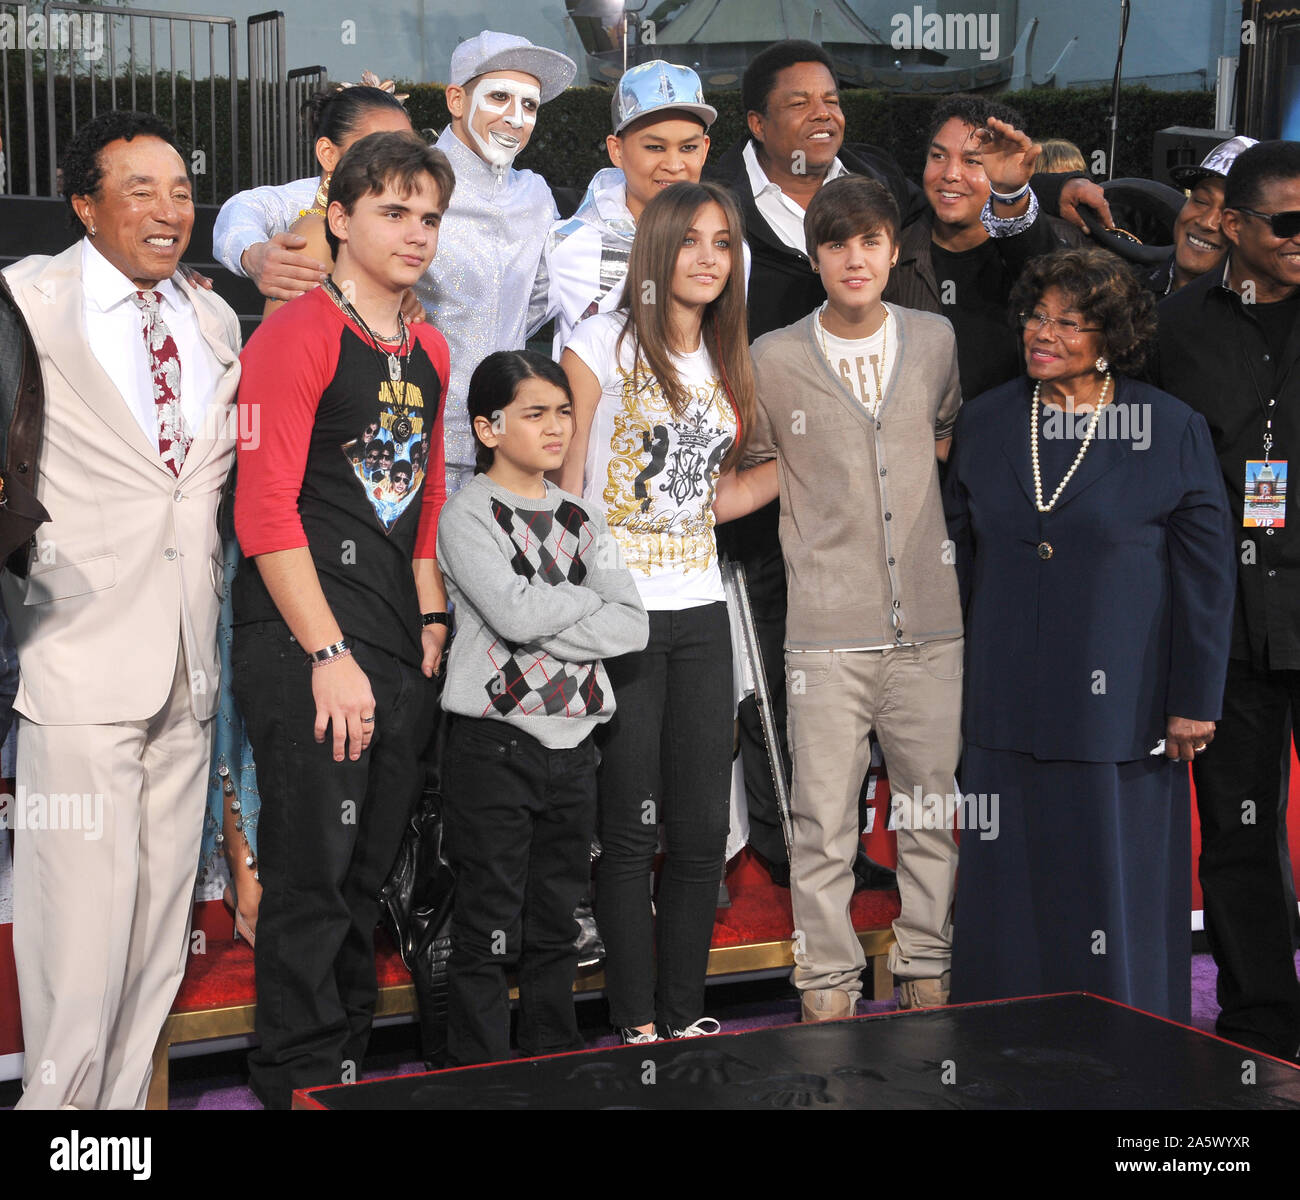 LOS ANGELES, CA. January 26, 2012: Michael Jackson's children Prince Michael, Paris & Prince Michael II 'Blanket' with their grandmother Katherine Jackson & singer Justin Bieber, Smikey Robinson, Quincy Jones & Tito Jackson on Hollywood Boulevard where they placed their father's hand & footprints, using his shoes & glove, in cement in the courtyard of the Grauman's Chinese Theatre. Cirque du Soleil's new show 'Michael Jackson THE IMMORTAL World Tour' premieres in Los Angeles tomorrow. © 2012 Paul Smith / Featureflash Stock Photo